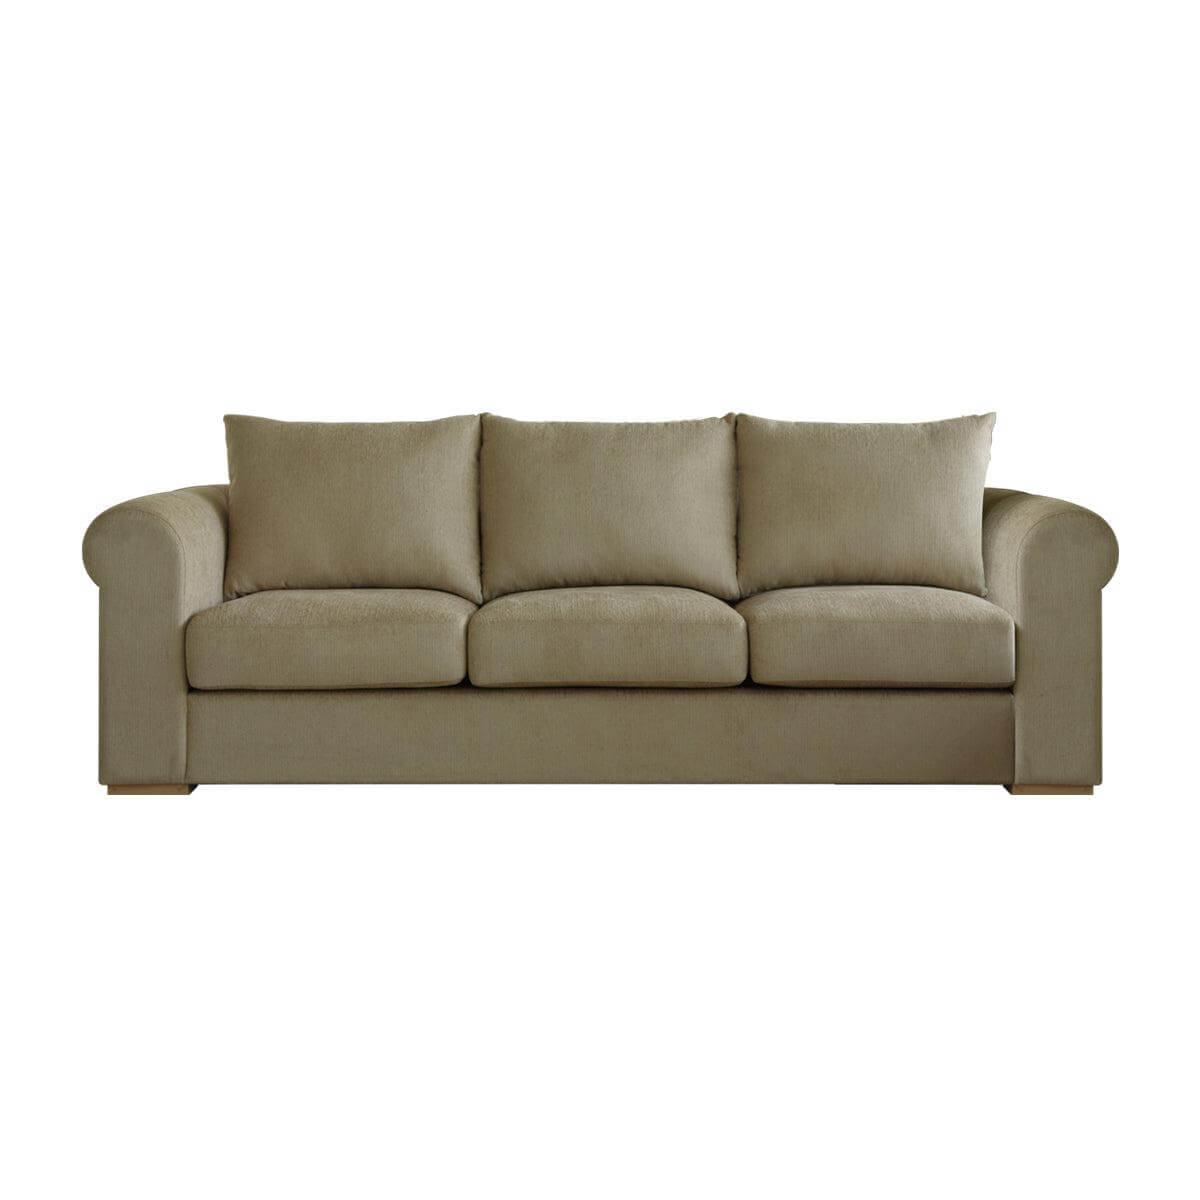 Tuscany 3-Seat Sofa -  classic look paired with modern